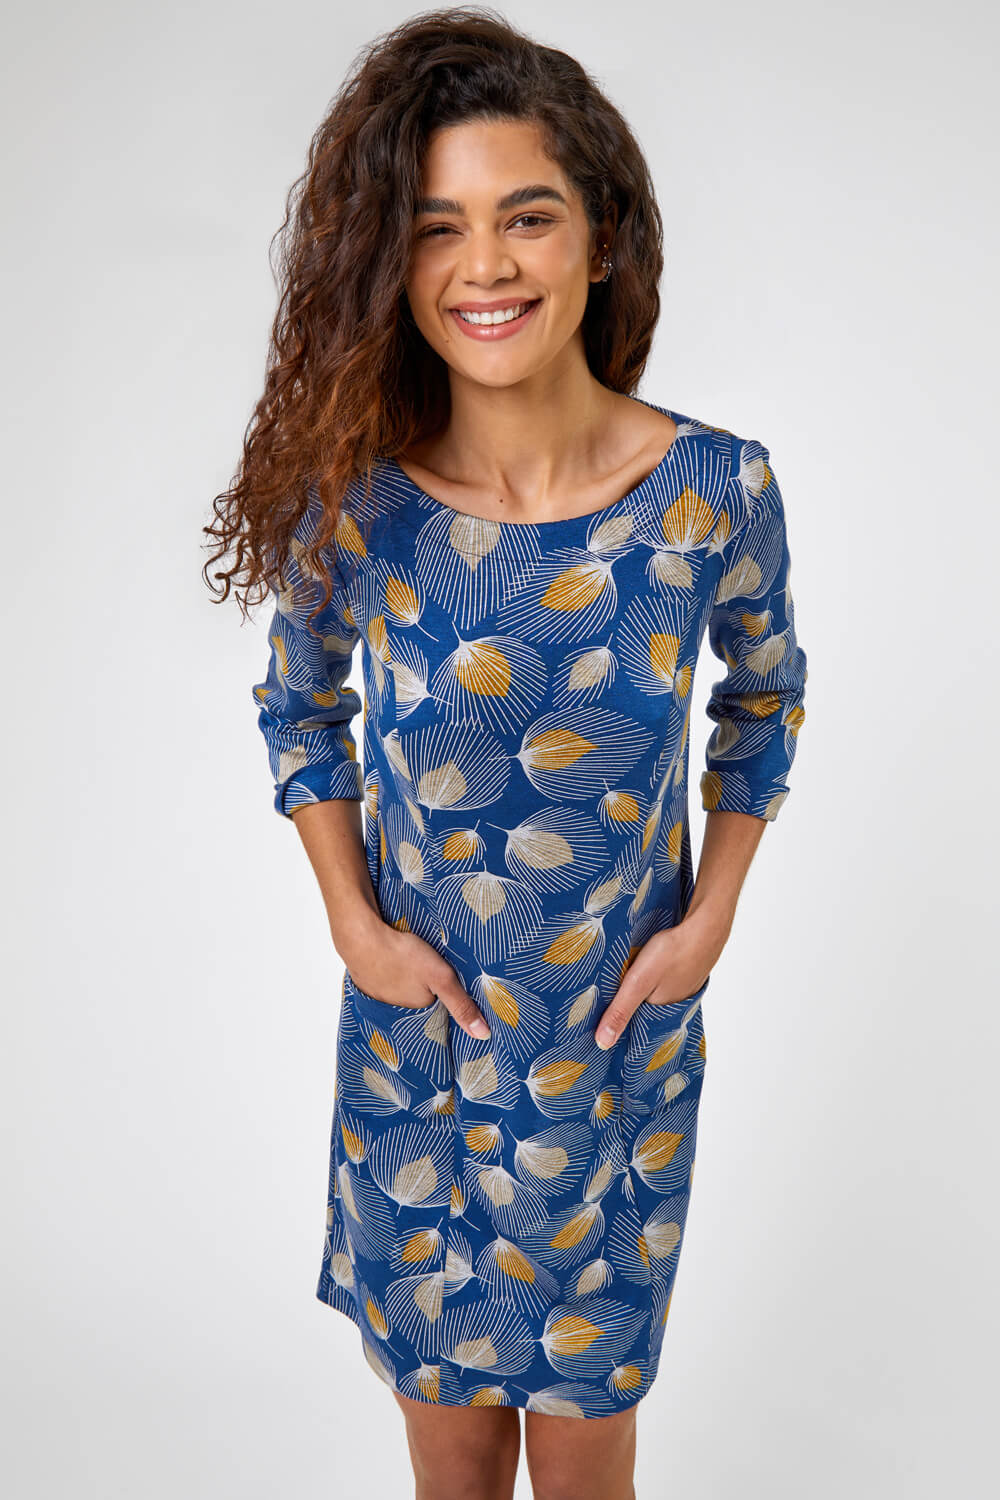 Blue Graphic Floral Panel Shift Dress, Image 5 of 5